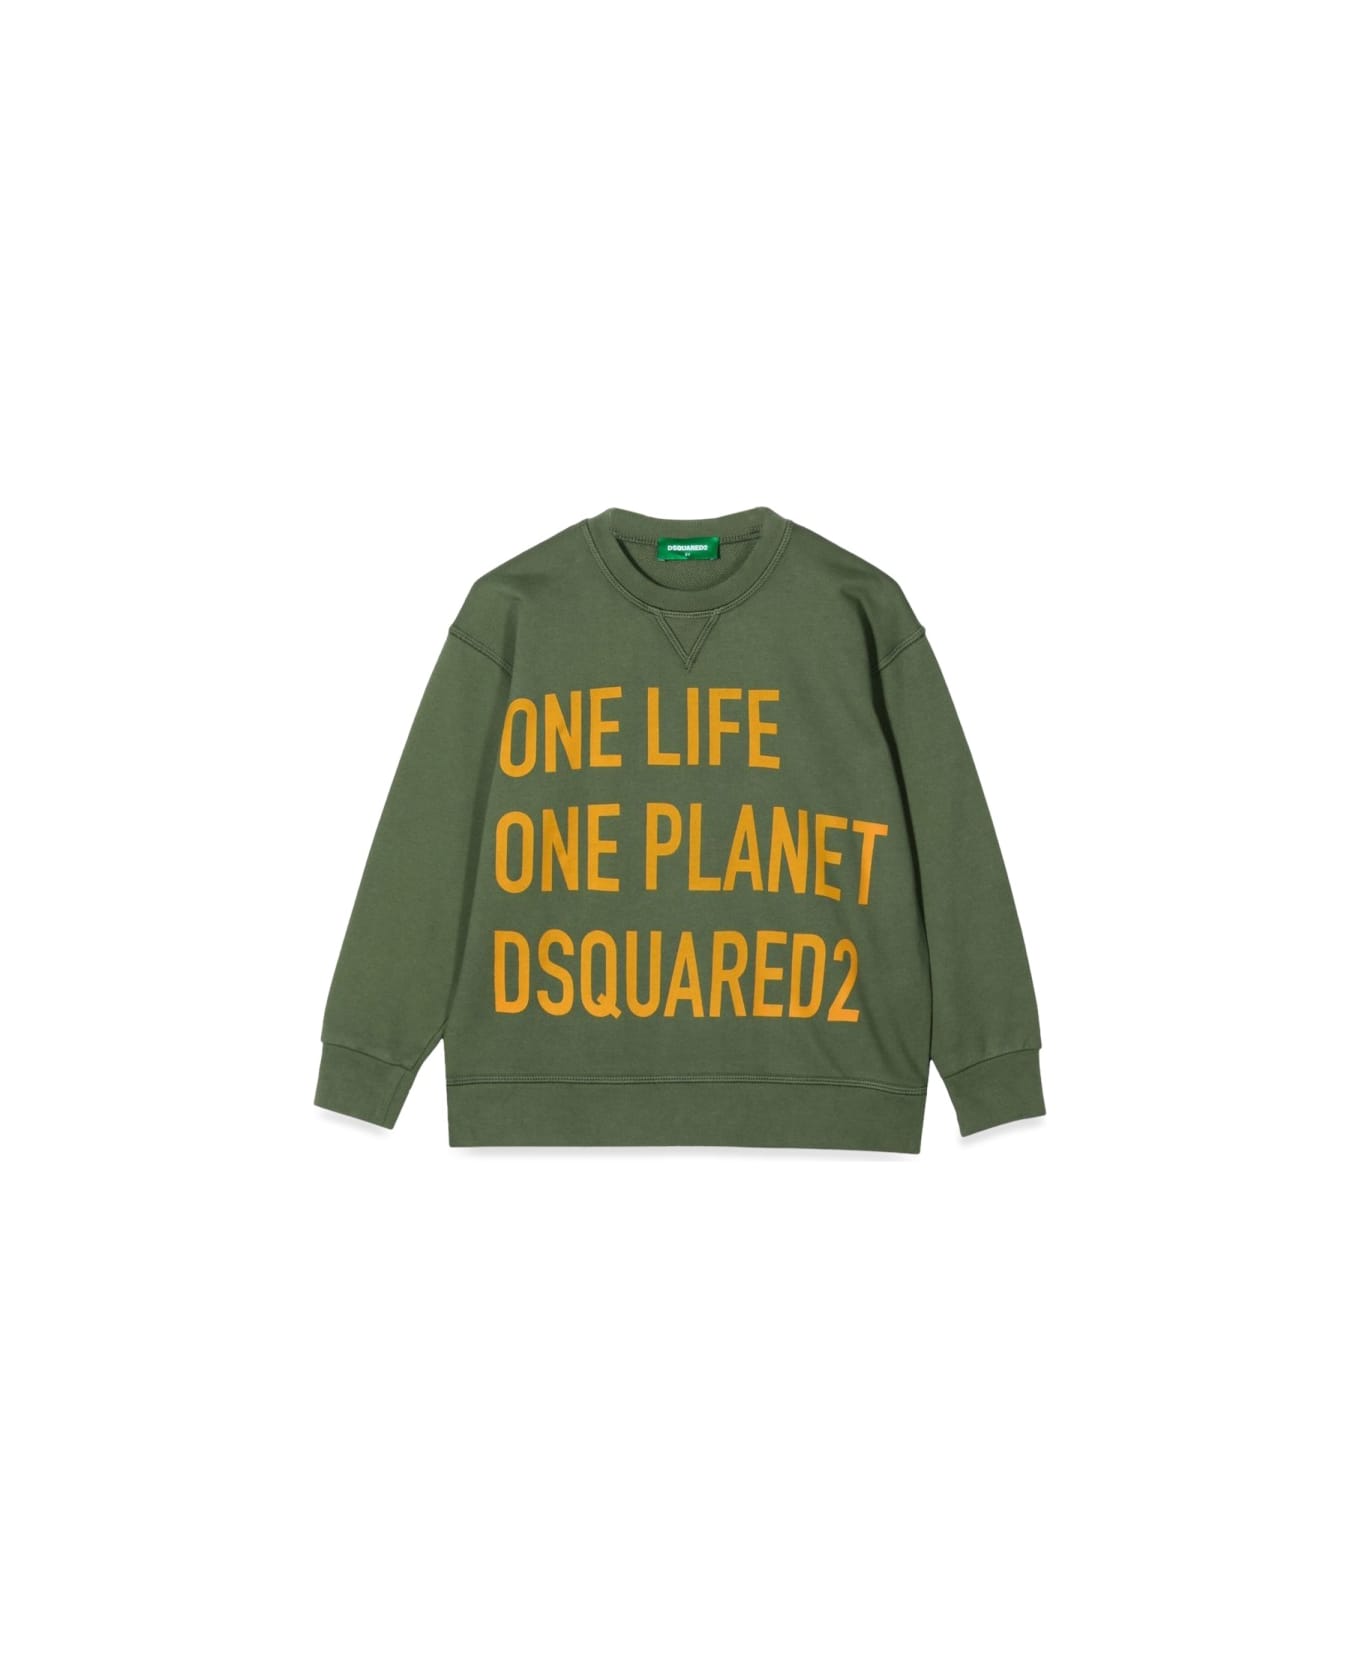 Dsquared2 One Life One Planet Sweatshirt - GREEN